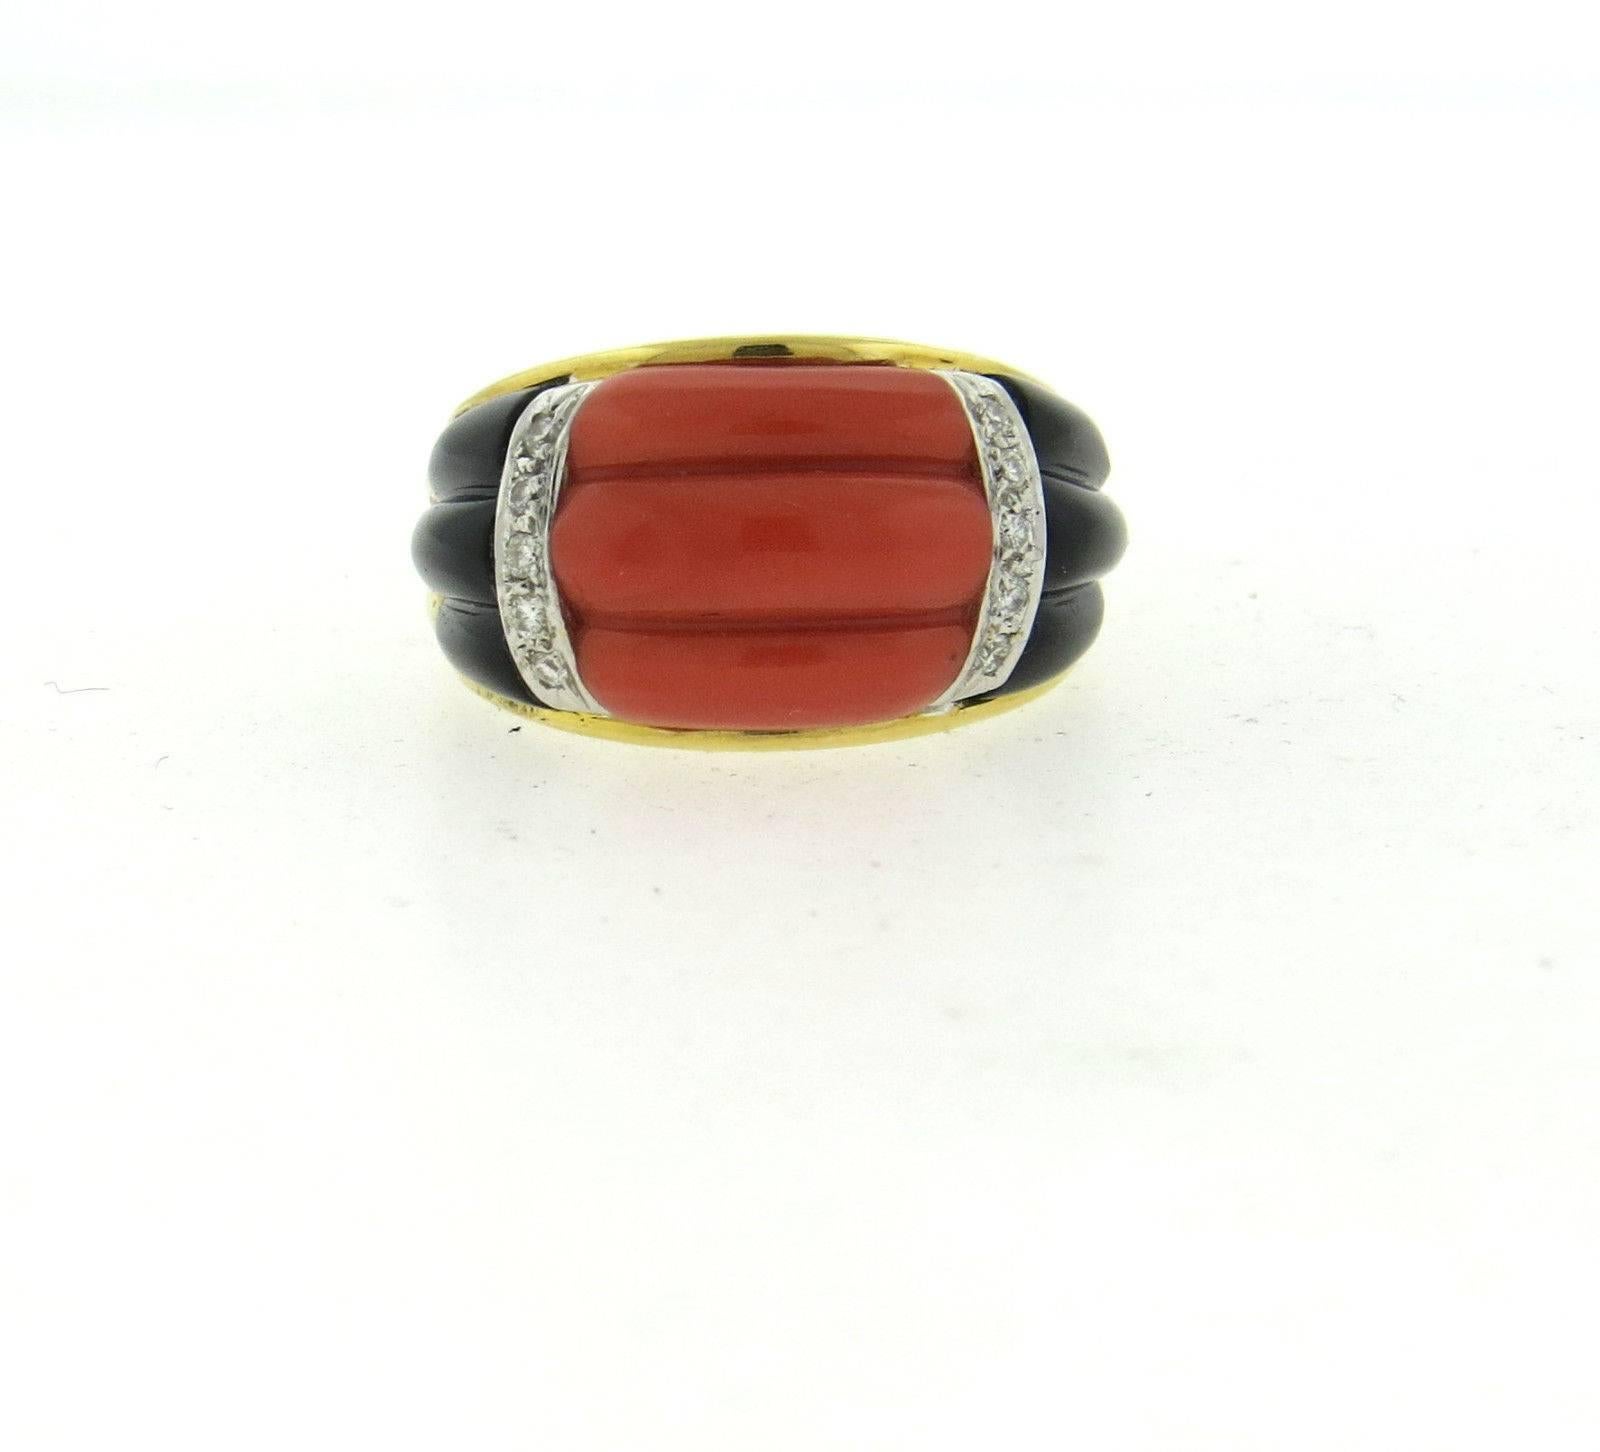 An 18k yellow gold ring adorned with carved coral and onyx and accented by approximately 0.10ctw of H/VS-SI diamonds.  The ring is a size 7 1/2 and 13mm wide. 